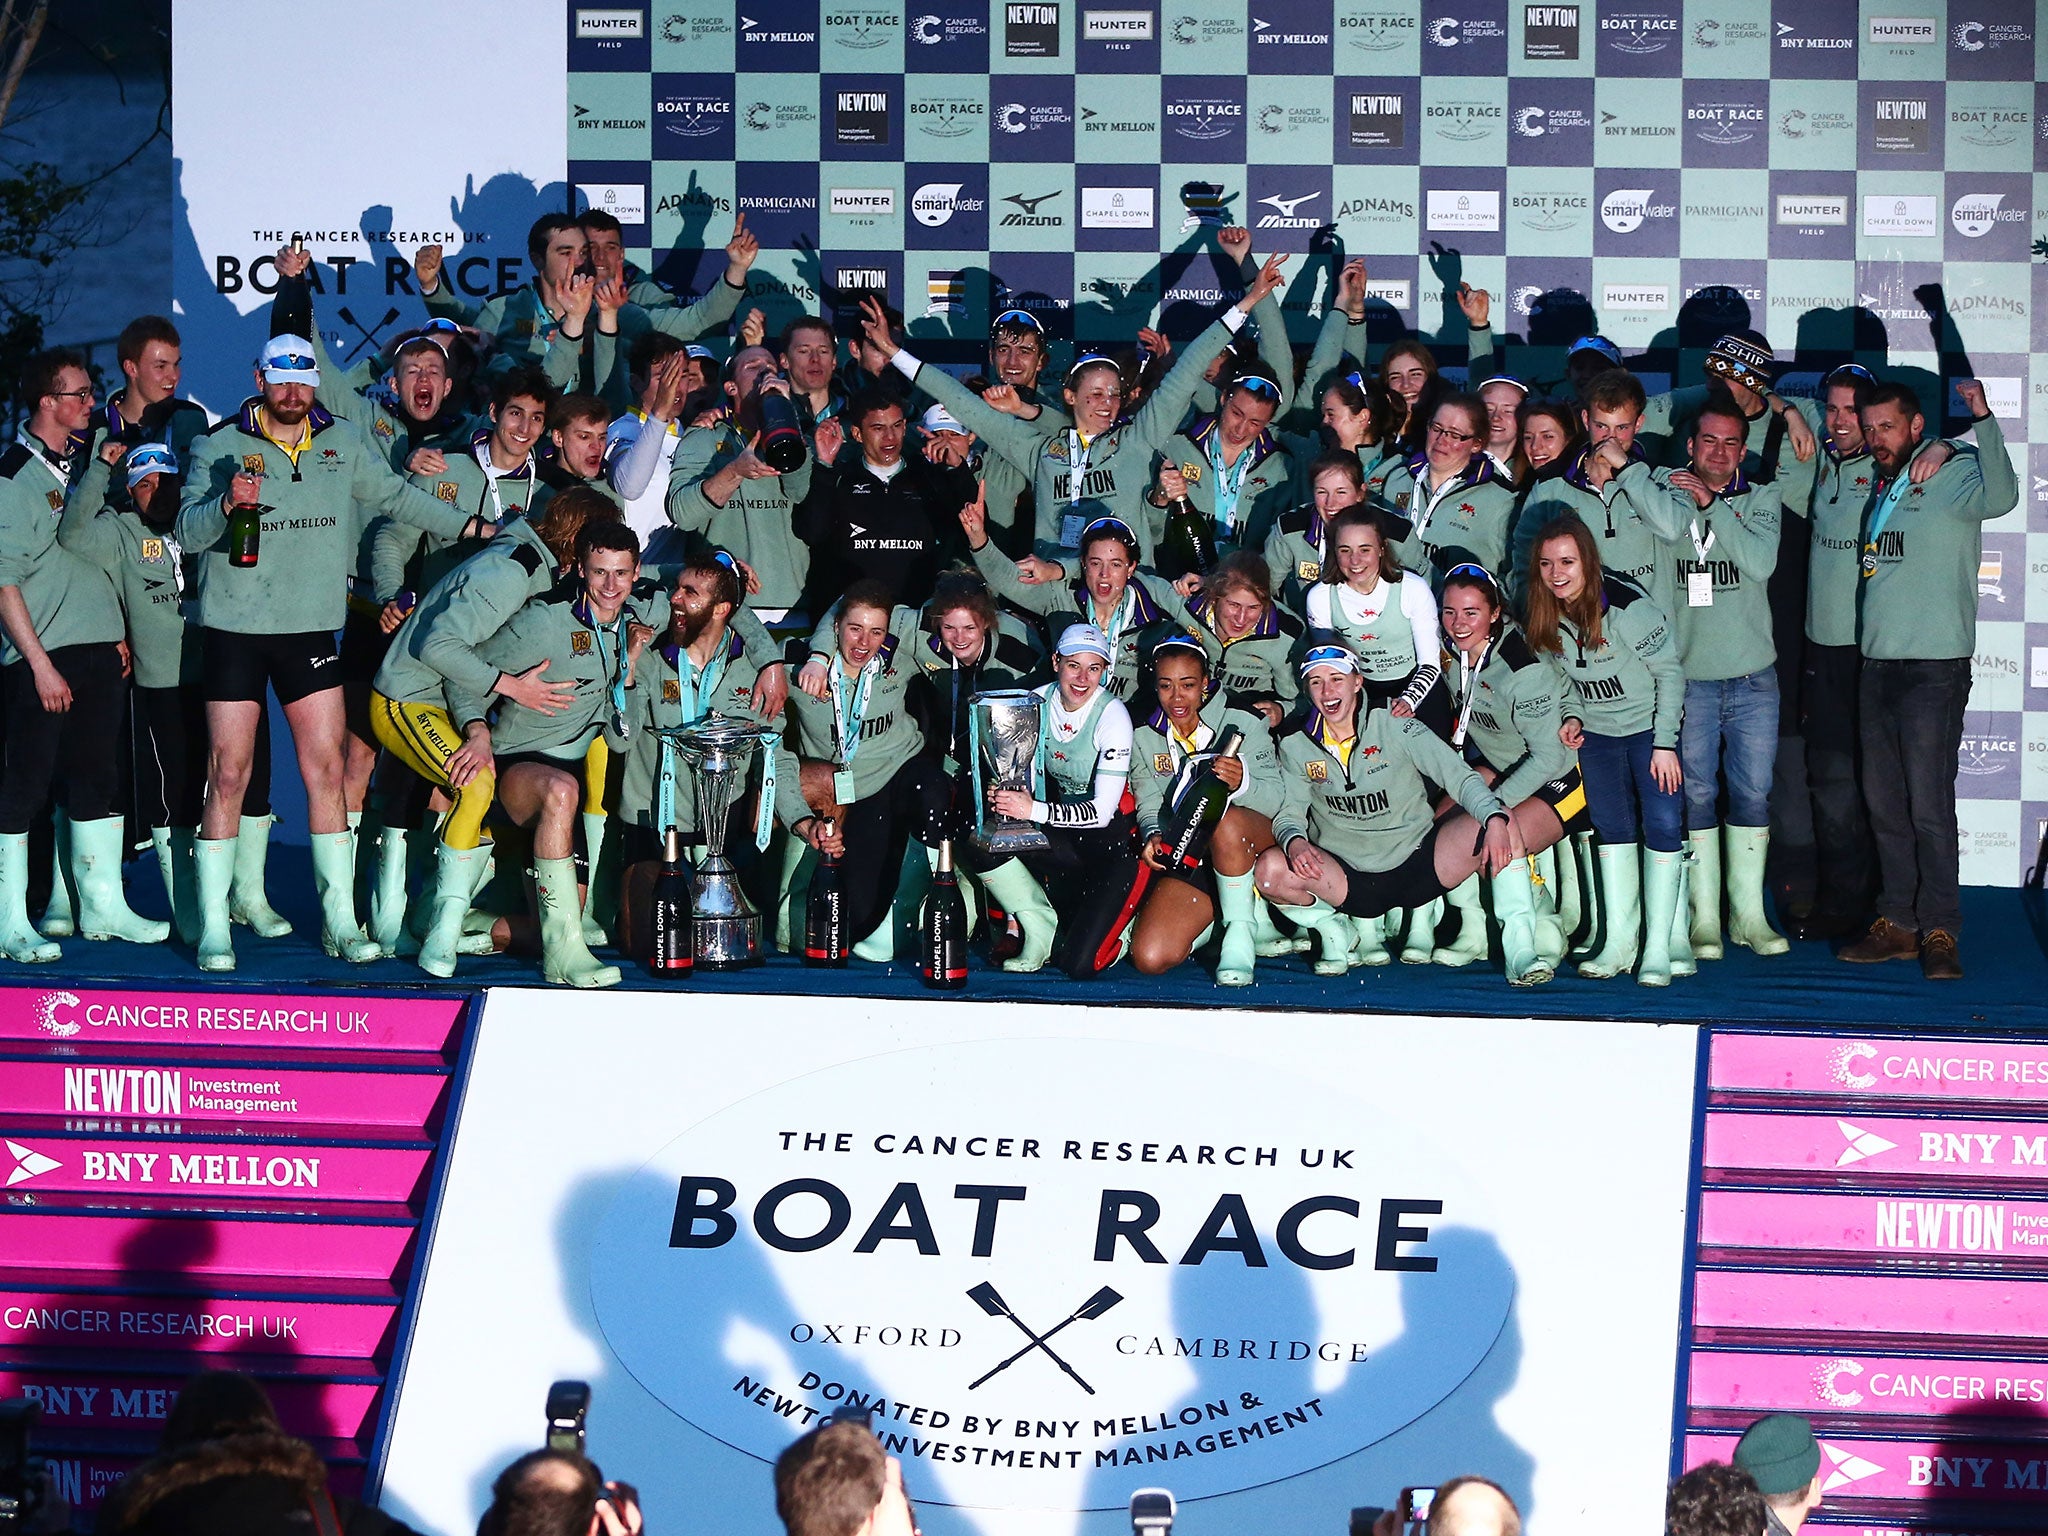 Cambridge claim clean sweep in 2018 Boat Race after men 